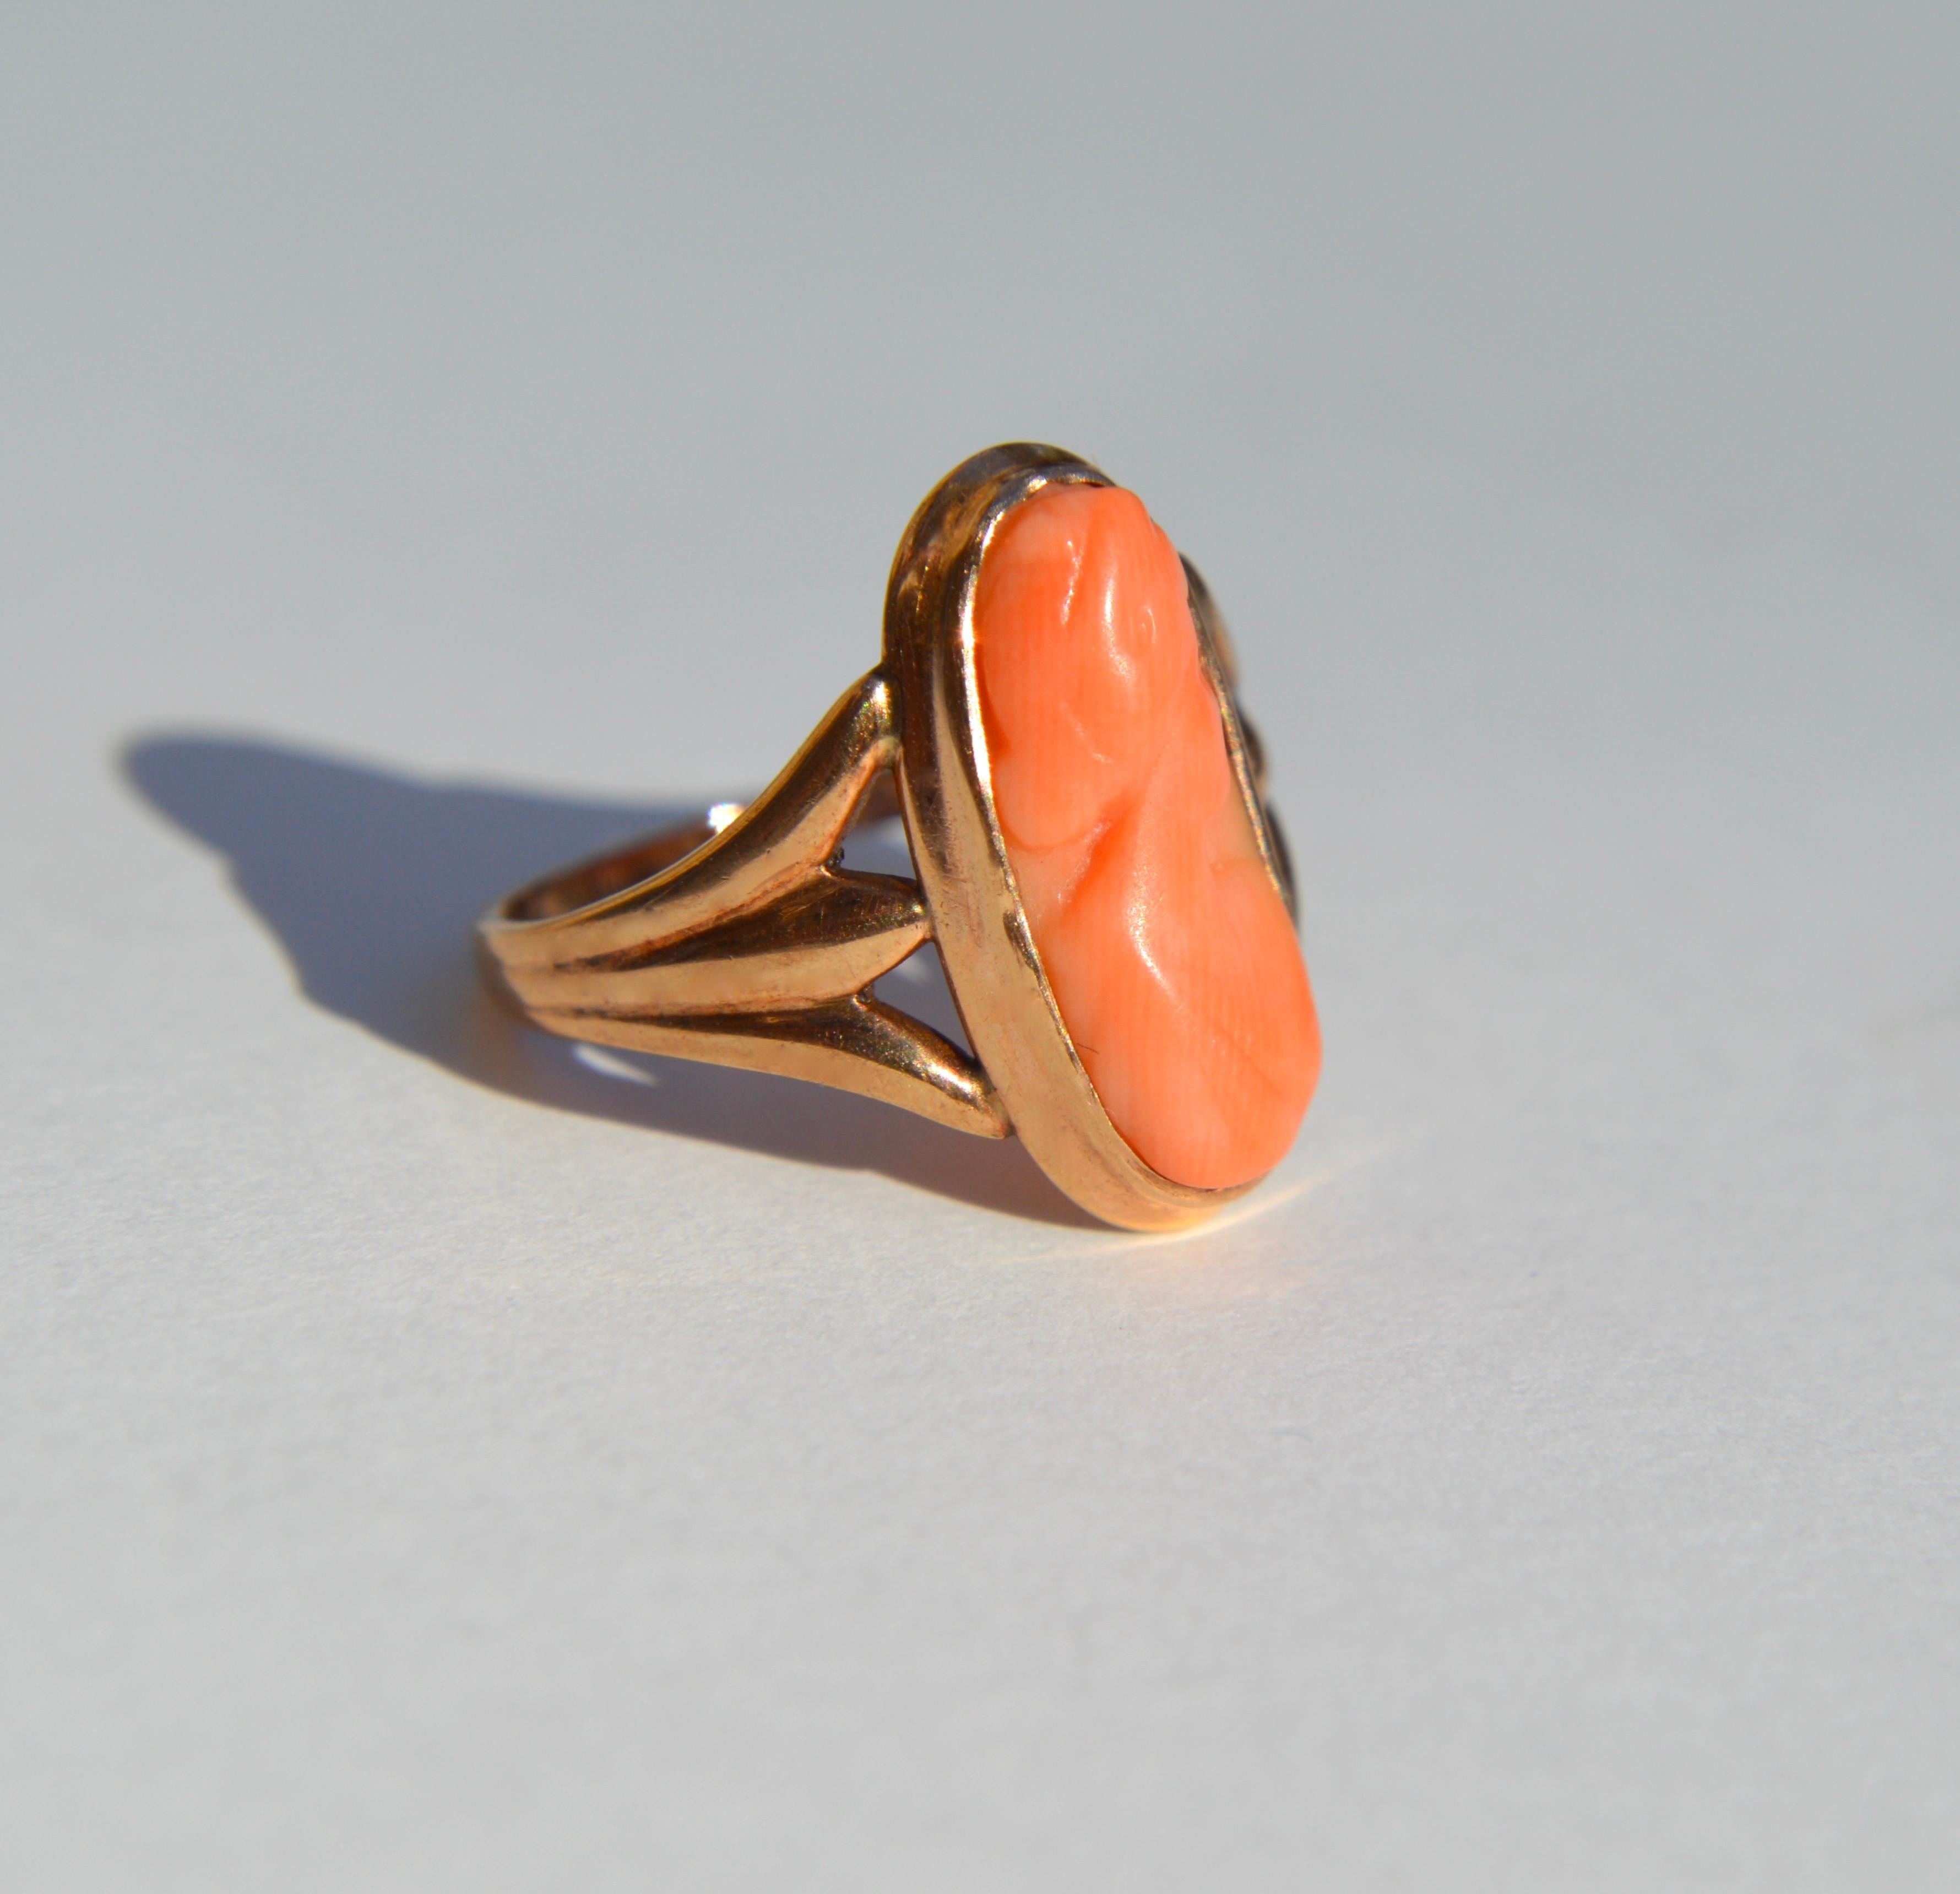 Lovely antique late 1800s Victorian era natural coral cameo portrait of a woman in 14K rosegold Size 4.75. ring is unmarked, but tested as solid 14K. Coral cameo measures 16x8mm. In good condition. Can be resized by your local jeweler. 

Coral